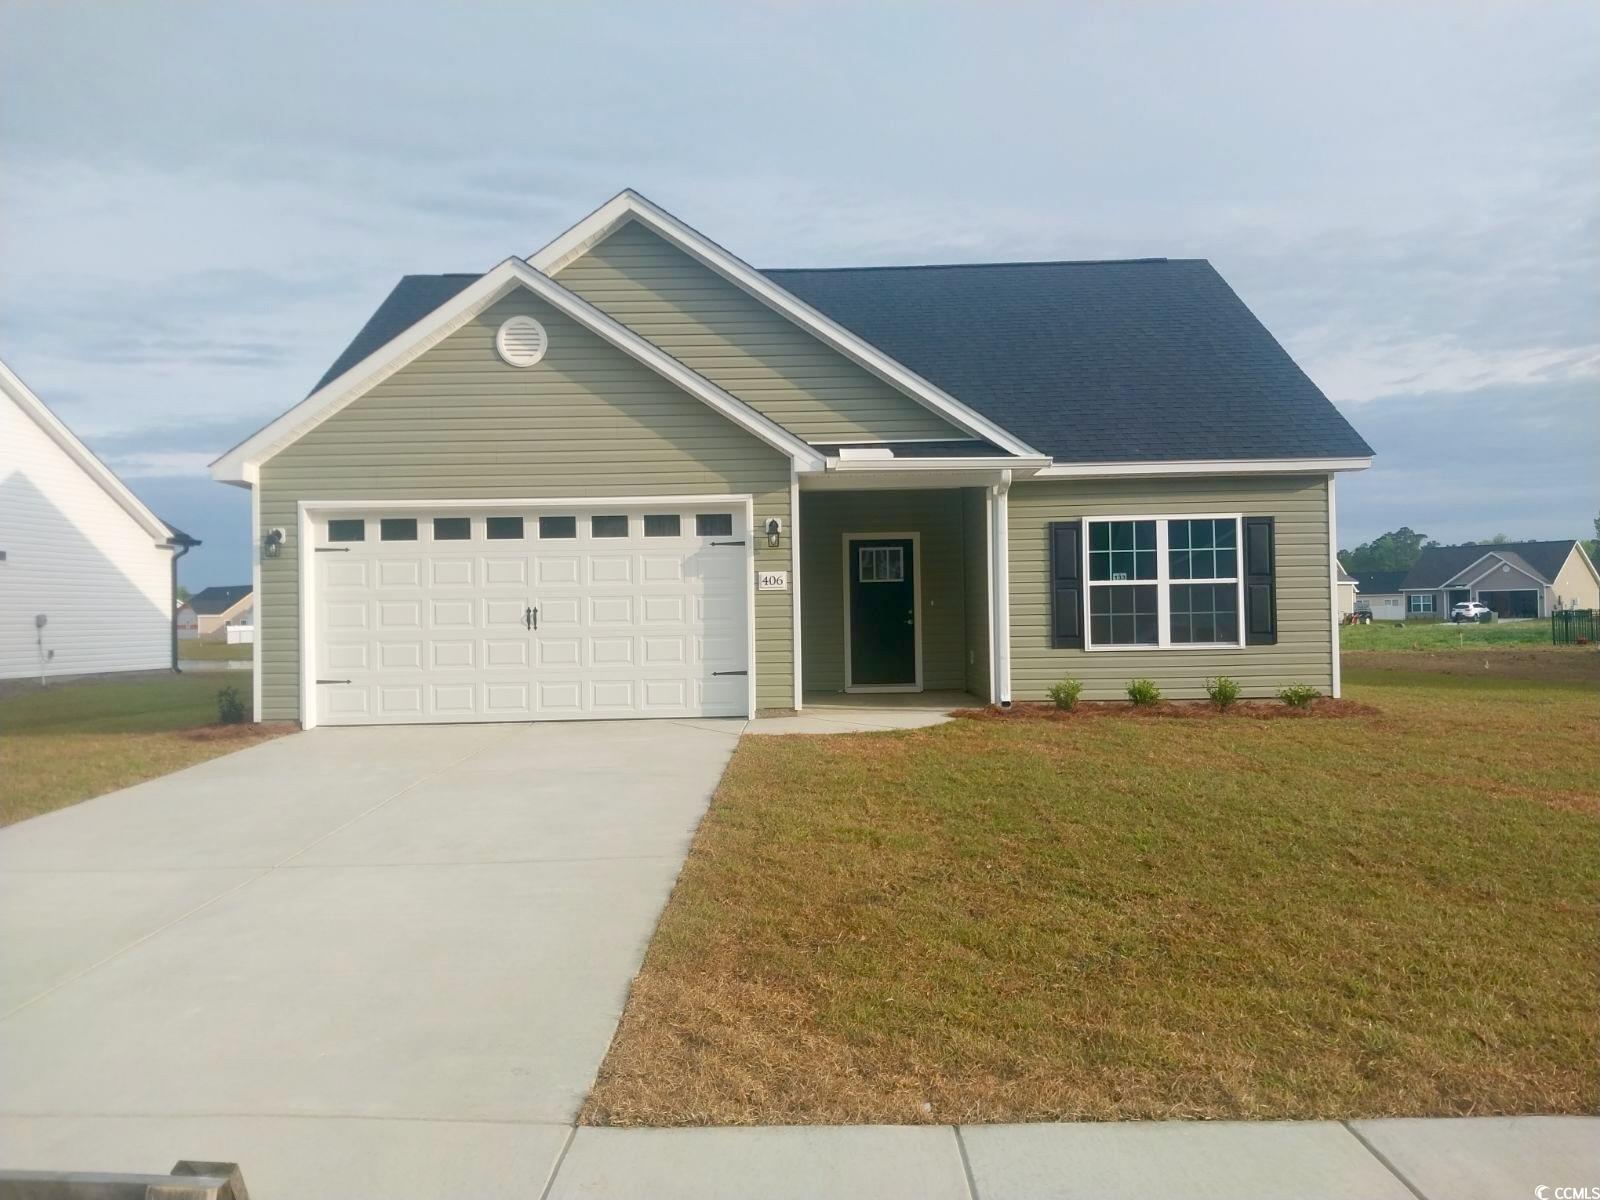 406 Shallow Cove Dr., Conway, SC 29527